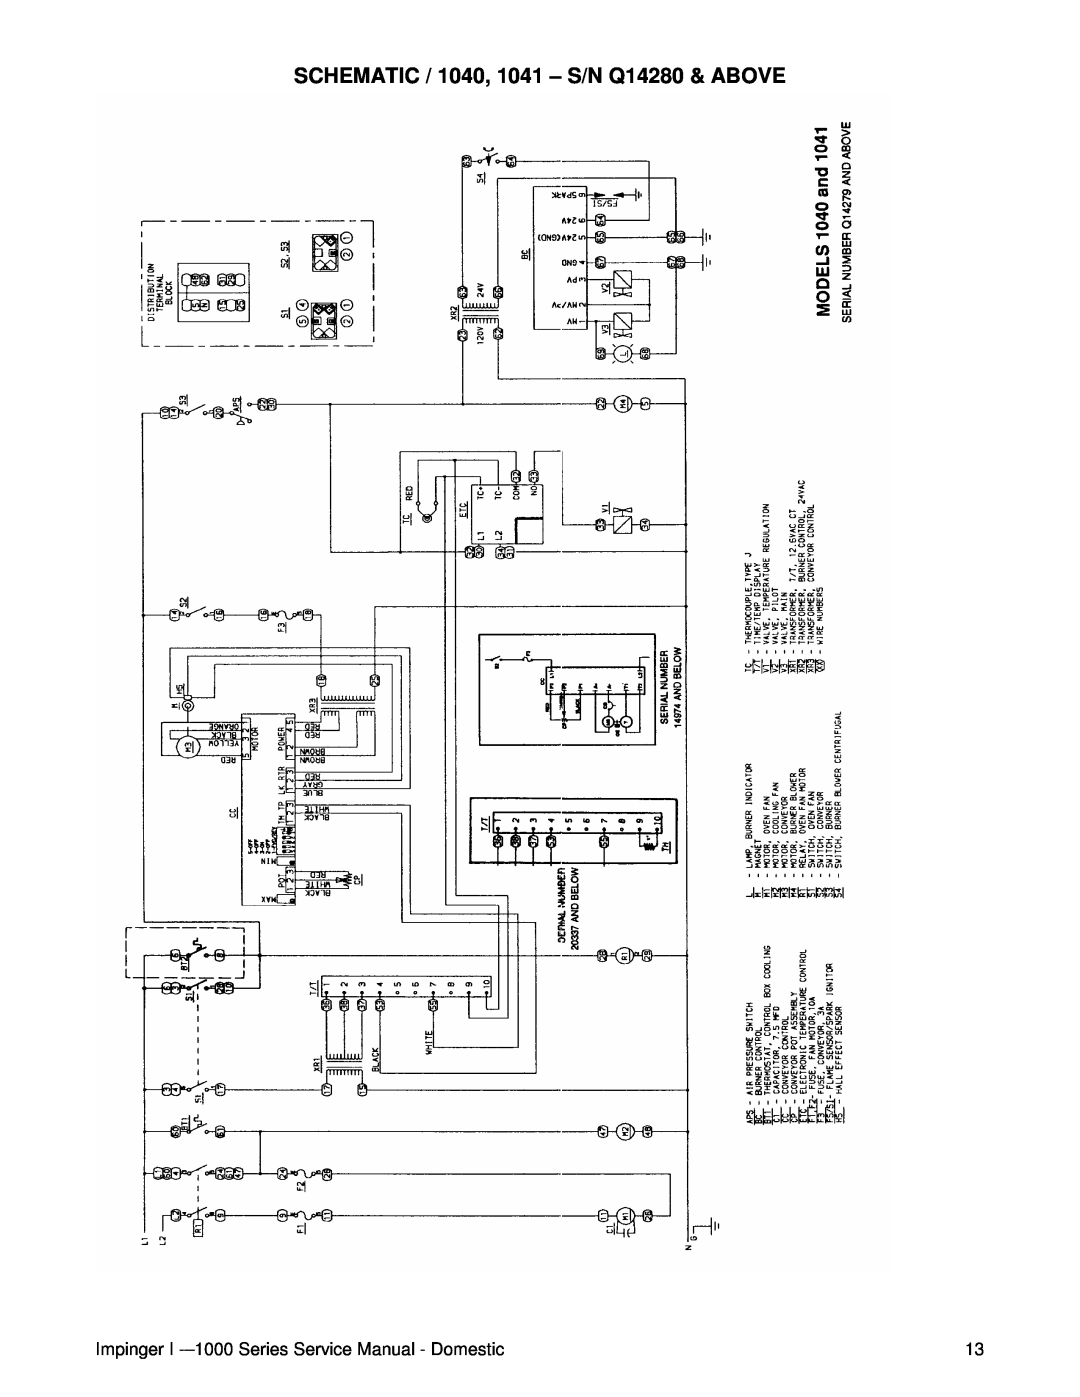 Lincoln 1200, 1400 SCHEMATIC / 1040, 1041 – S/N Q14280 & ABOVE, Impinger I -–1000Series Service Manual - Domestic 